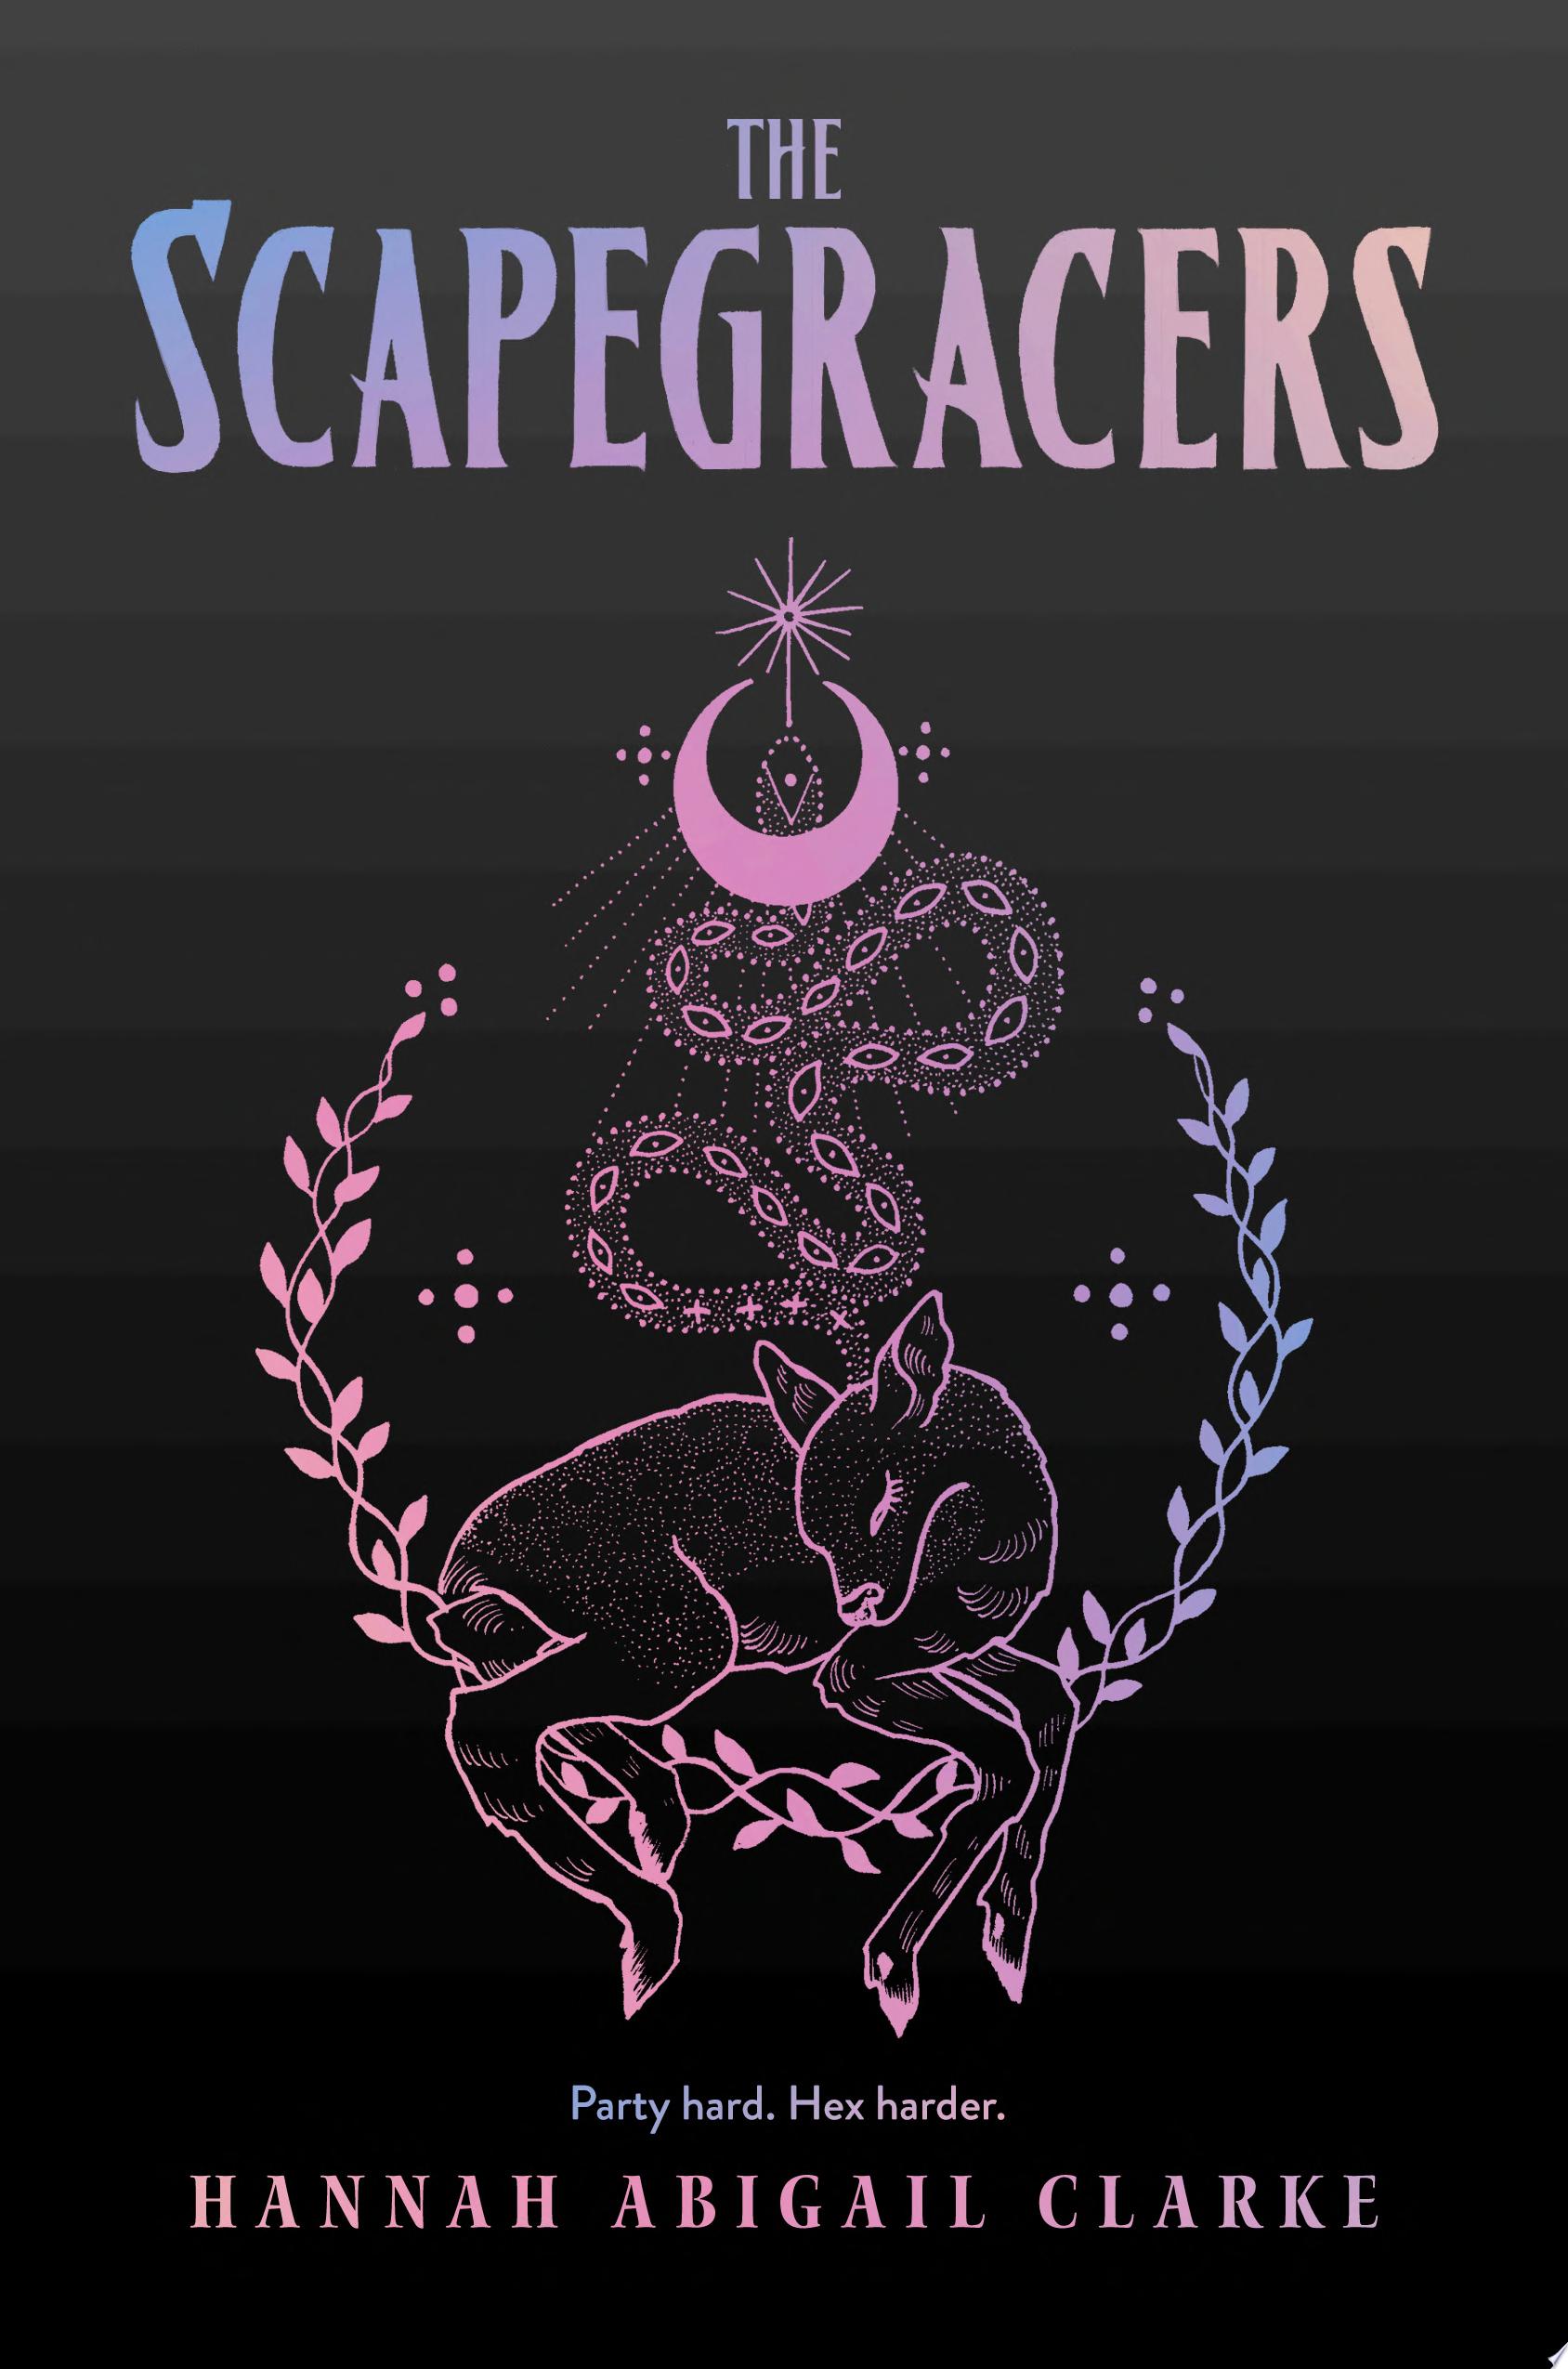 Image for "The Scapegracers"